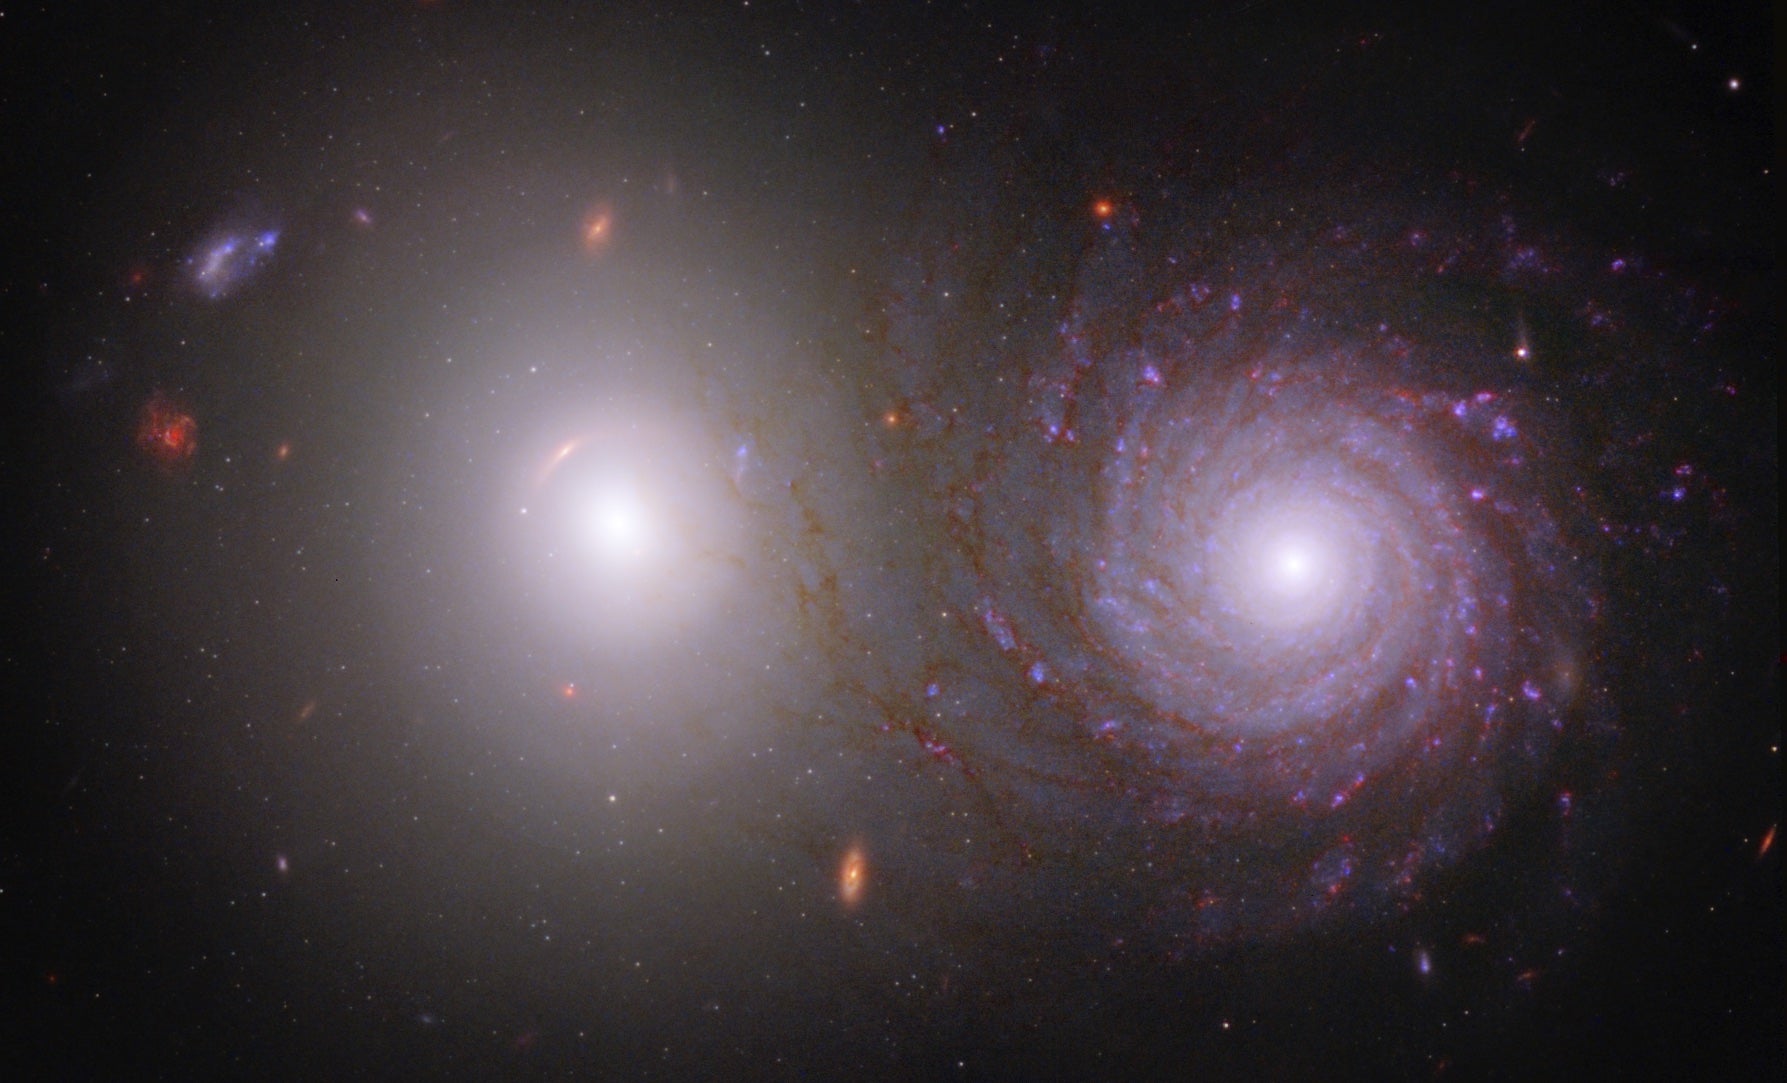 A galaxy pair as imaged by both the Hubble and James Webb space telescopes